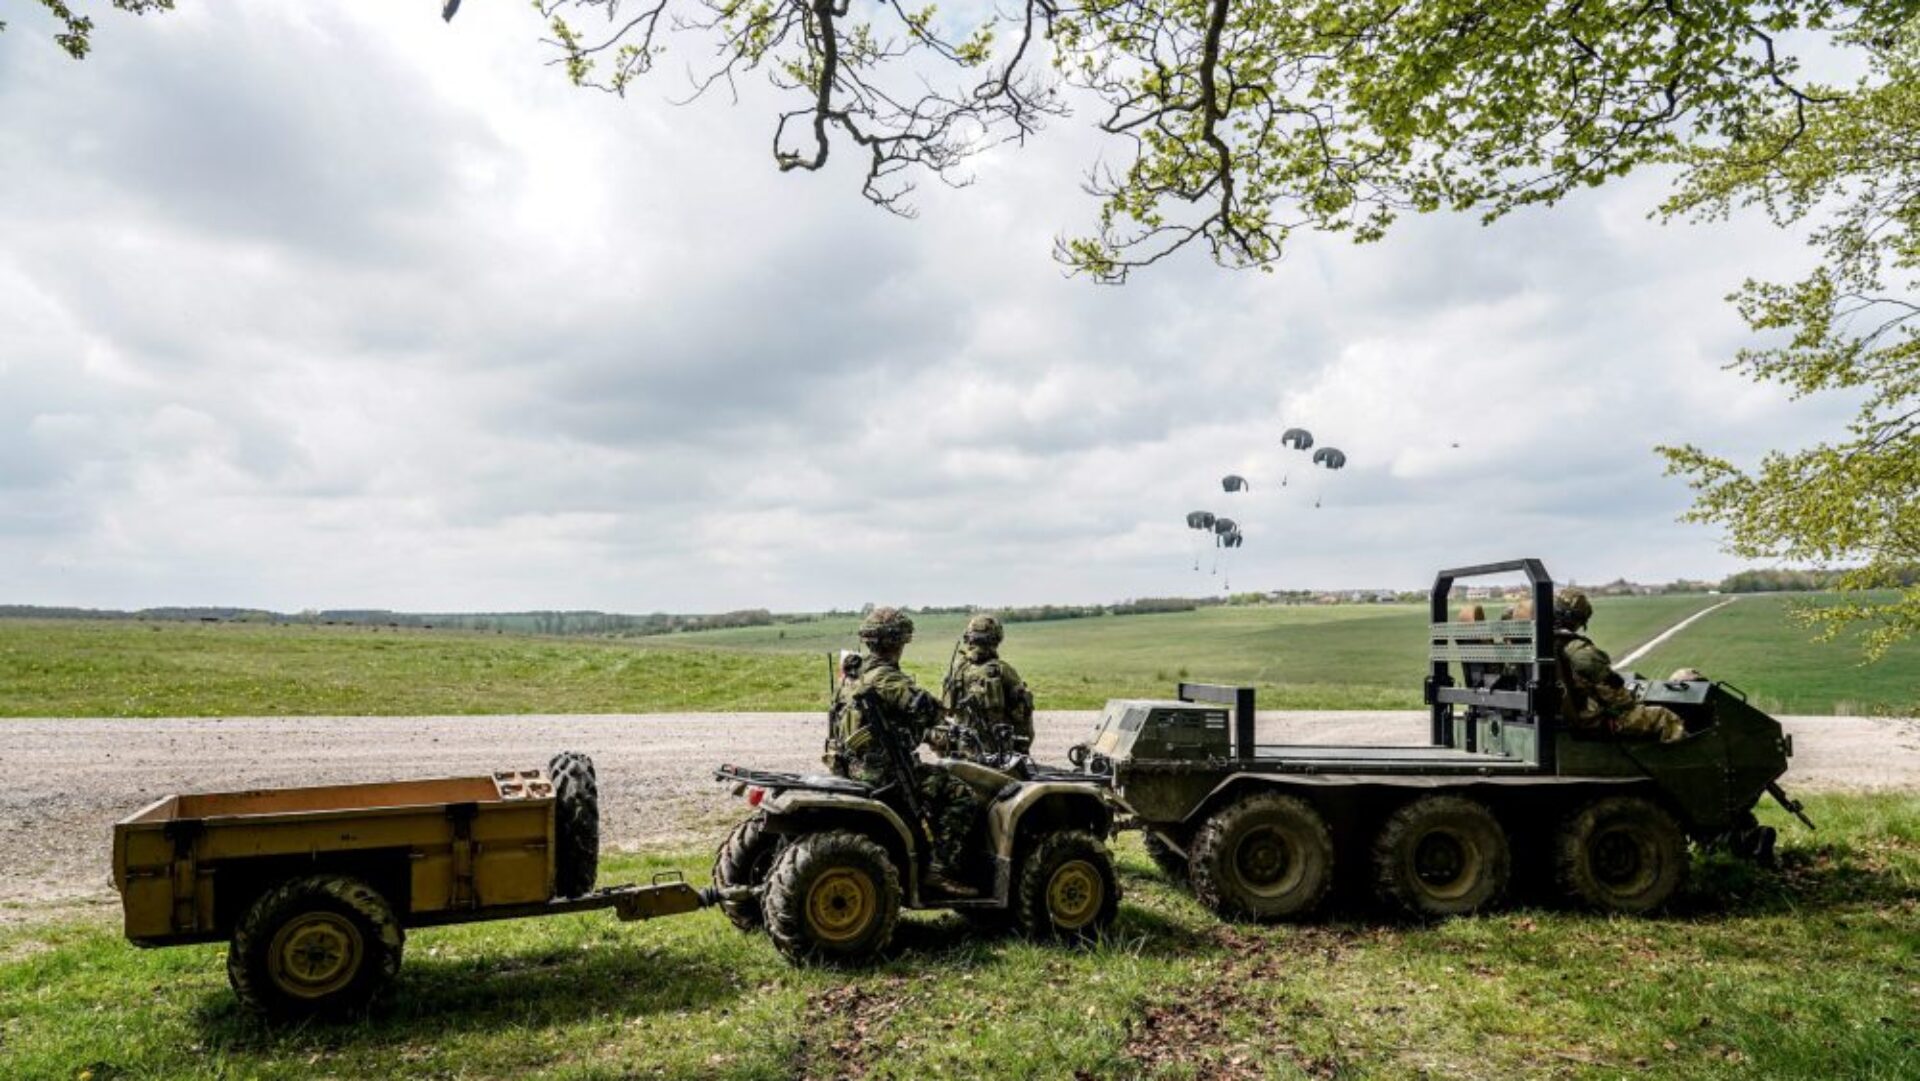 Exercise WESSEX STORM with the Queen’s Own Gurkha Logistic Regiment